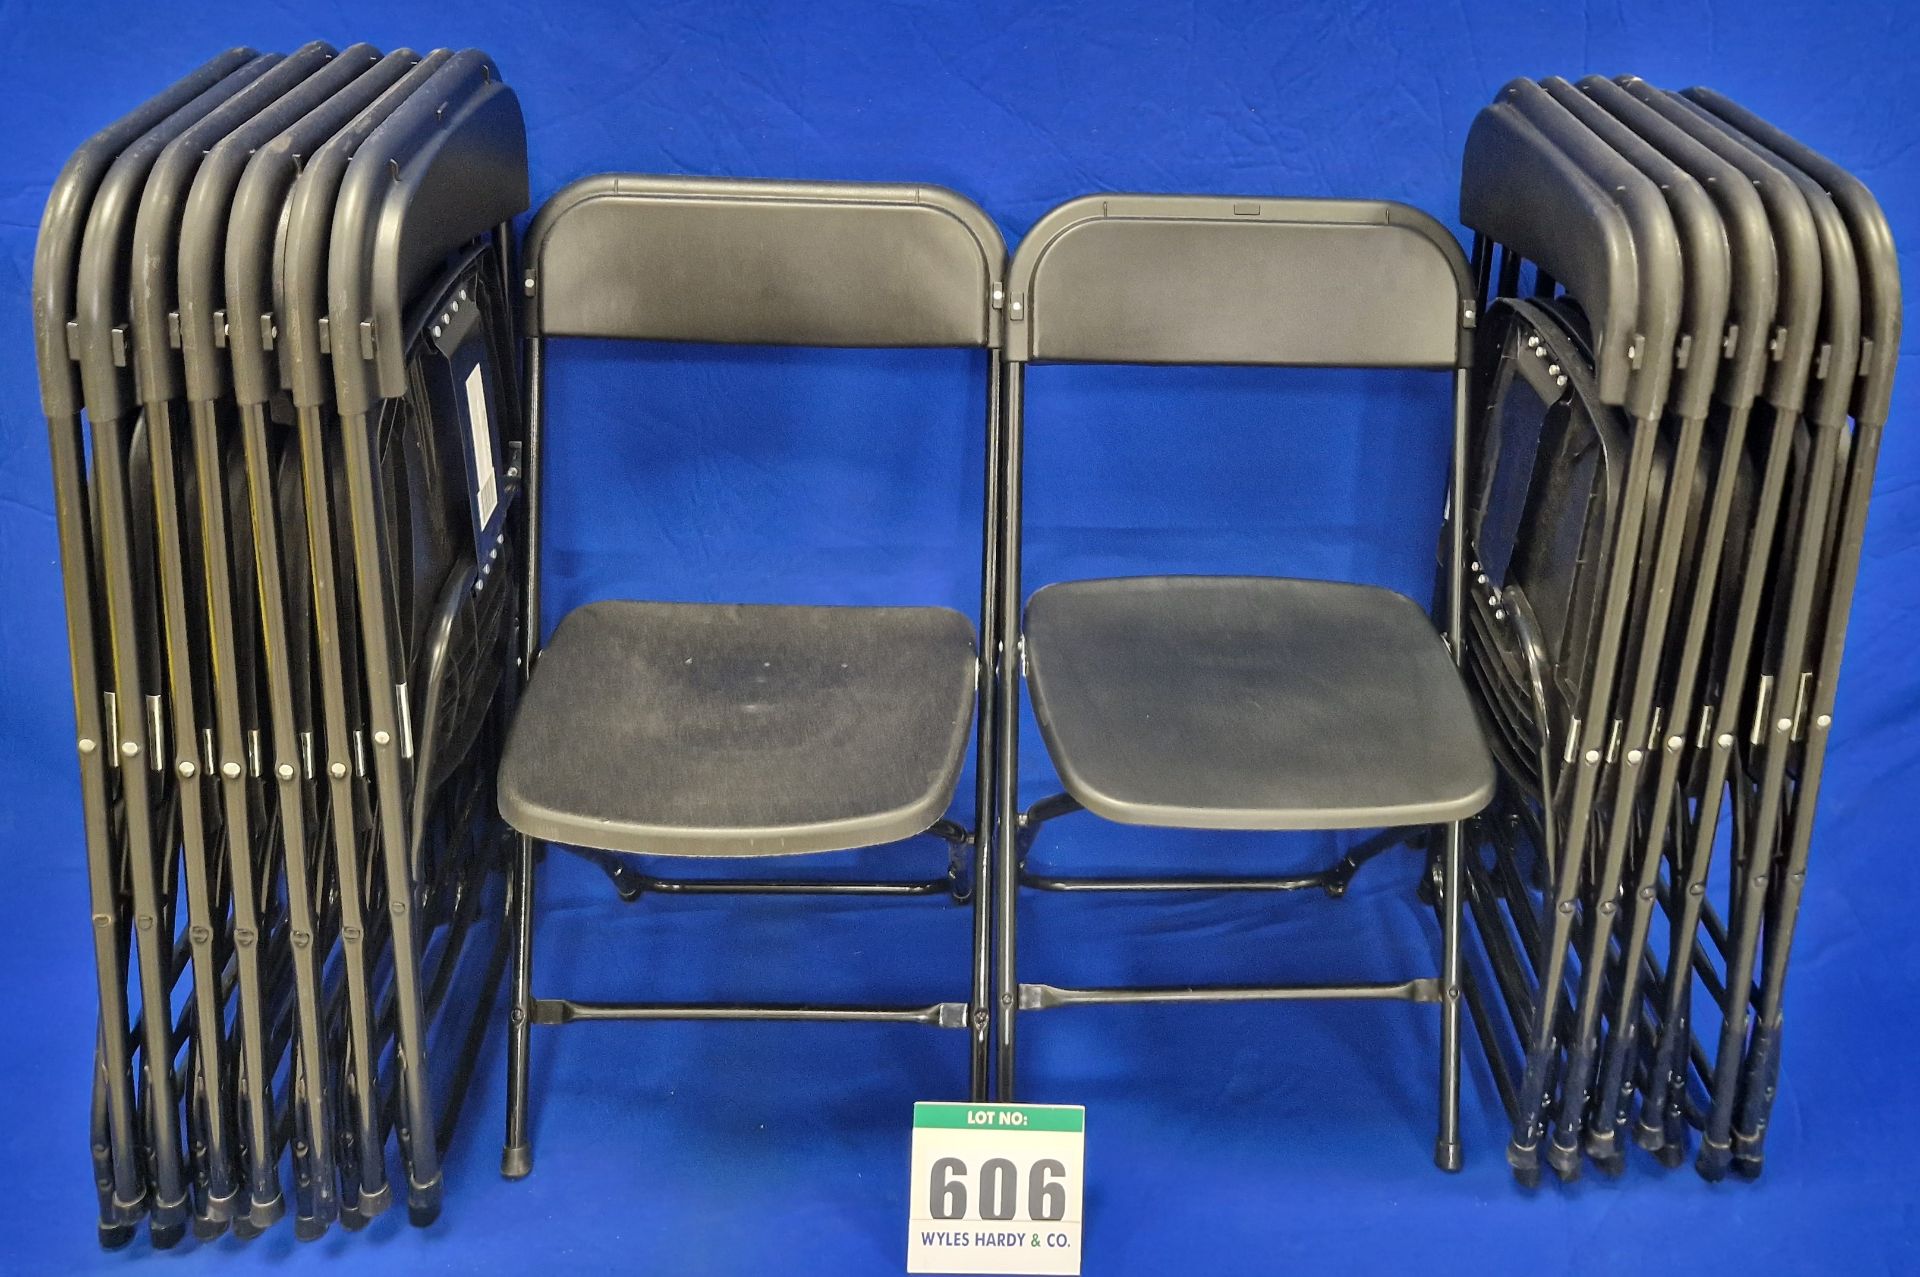 Fifteen Unbranded Steel Framed Folding Plastic Chairs